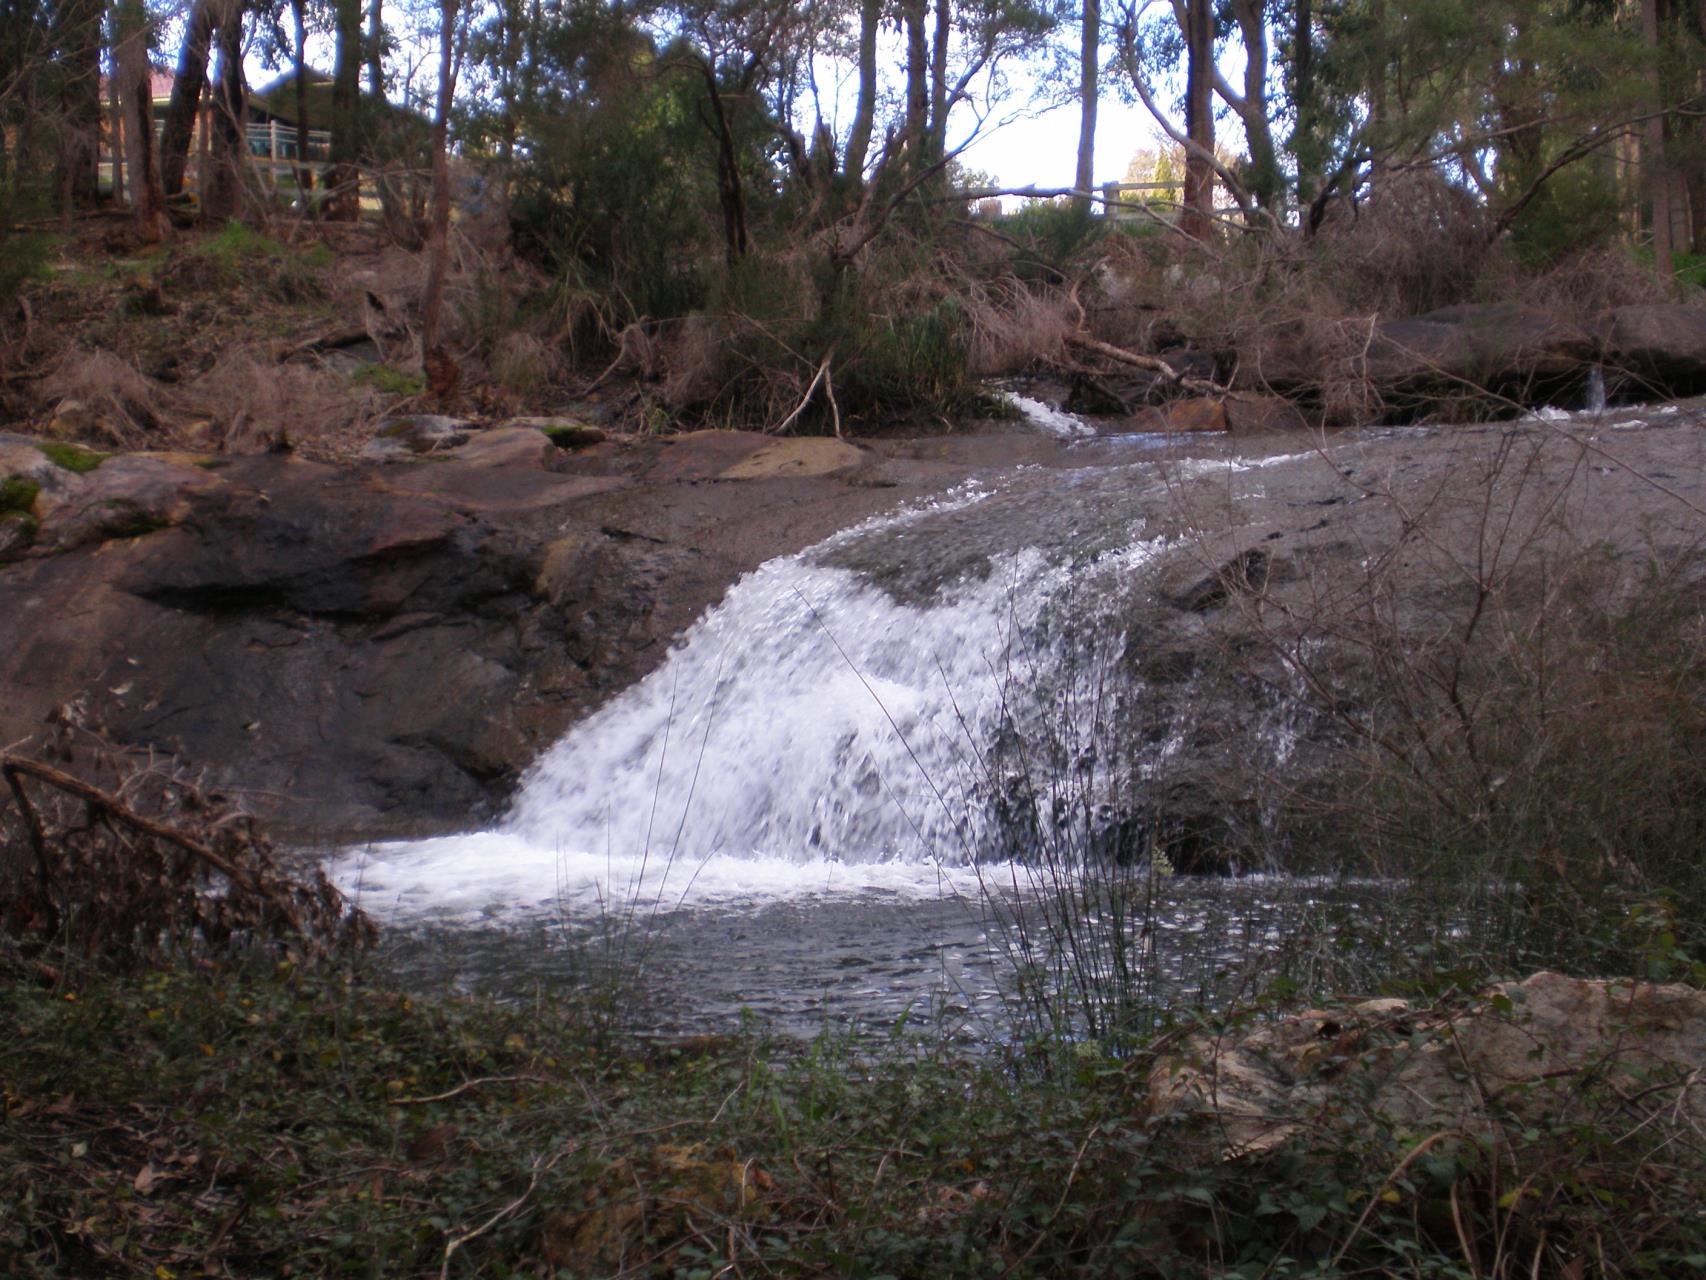 Shire of Serpentine Jarrahdale recognised once again as Gold Waterwise